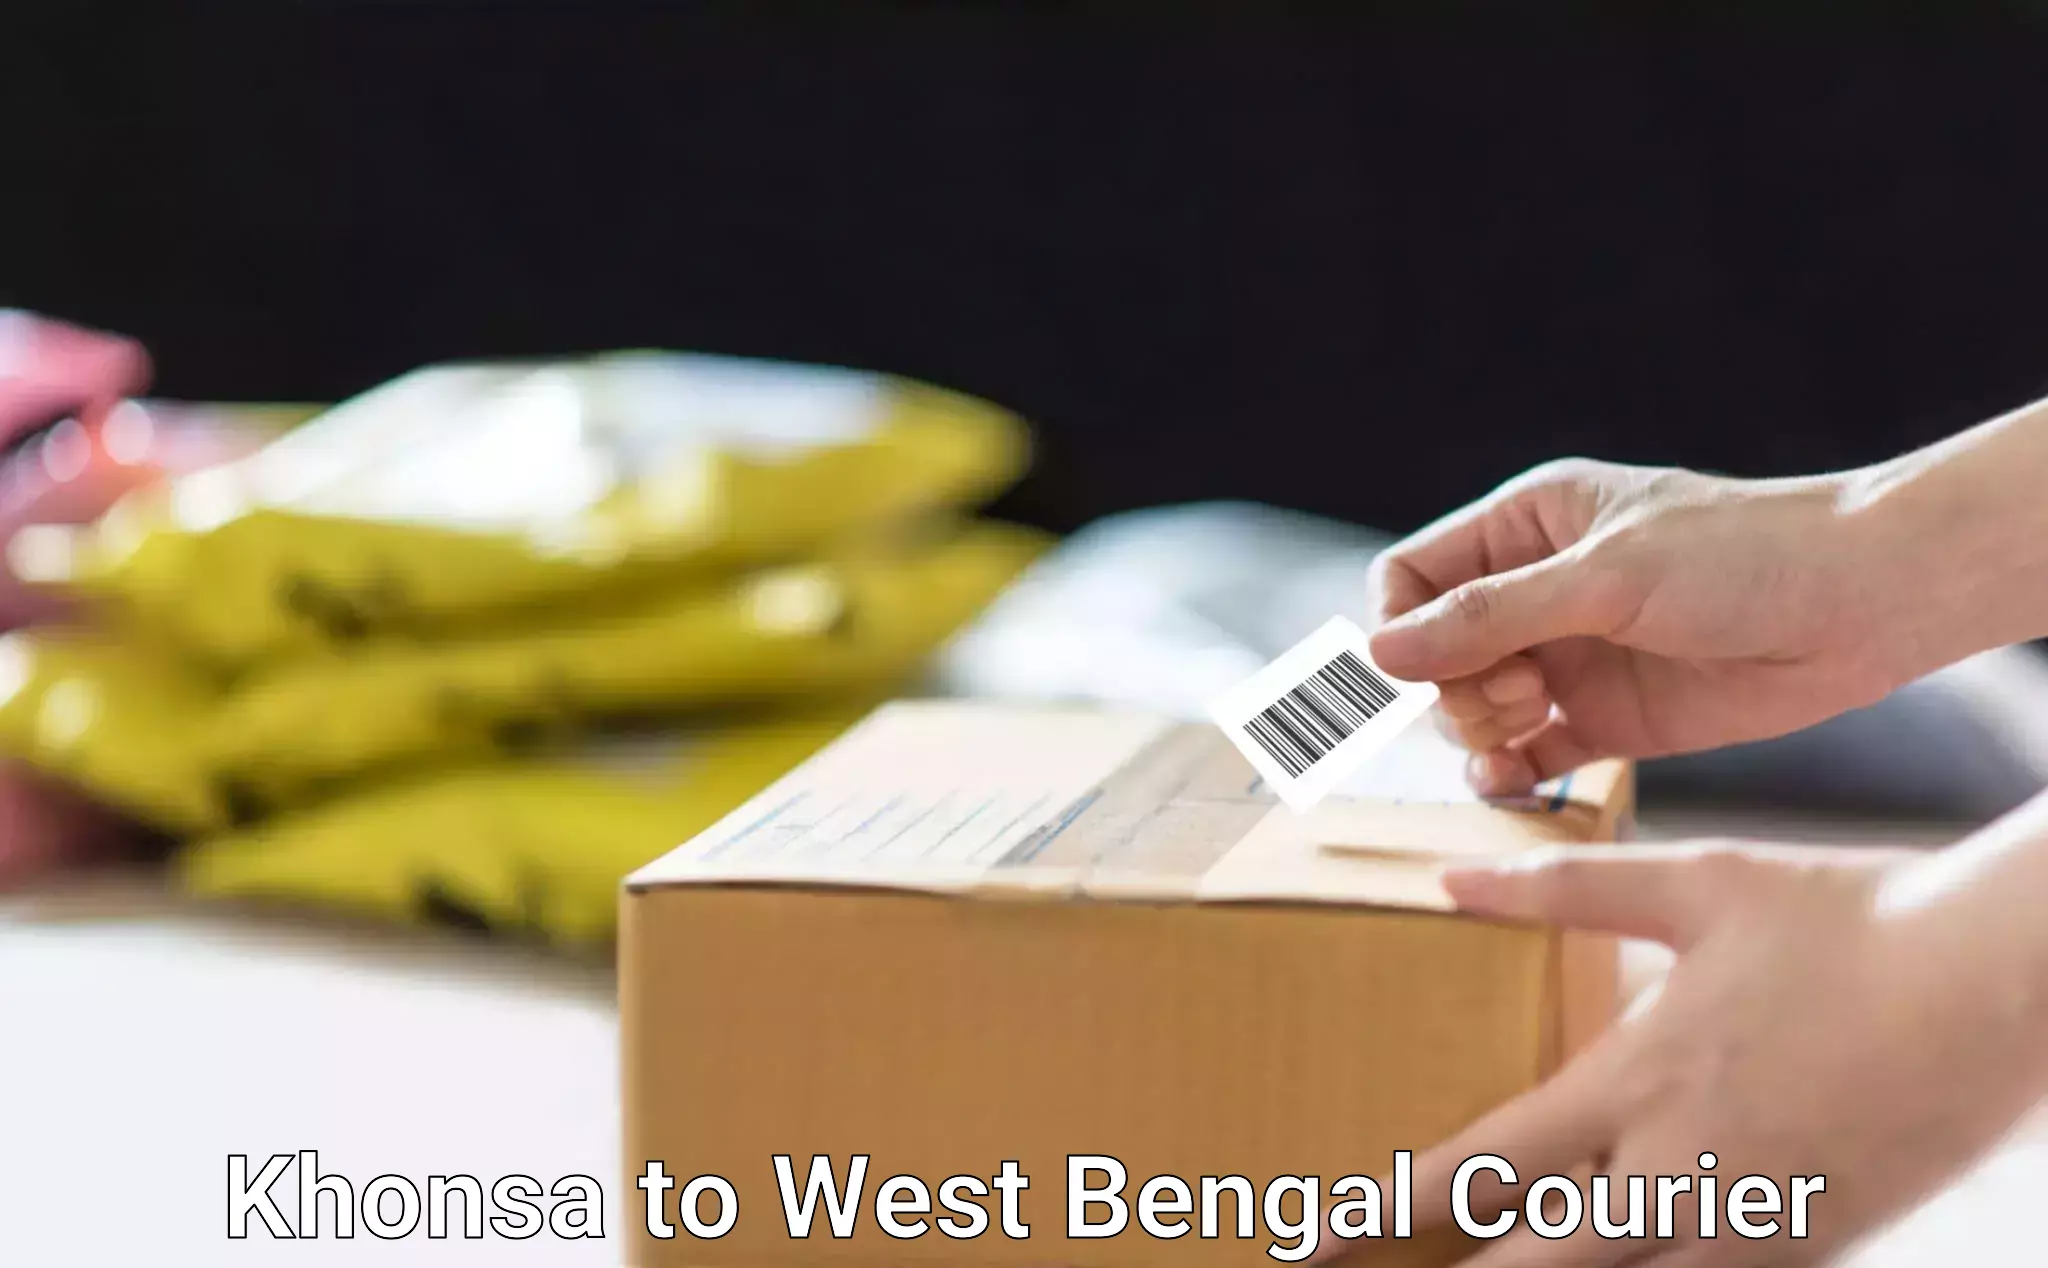 24/7 courier service Khonsa to West Bengal